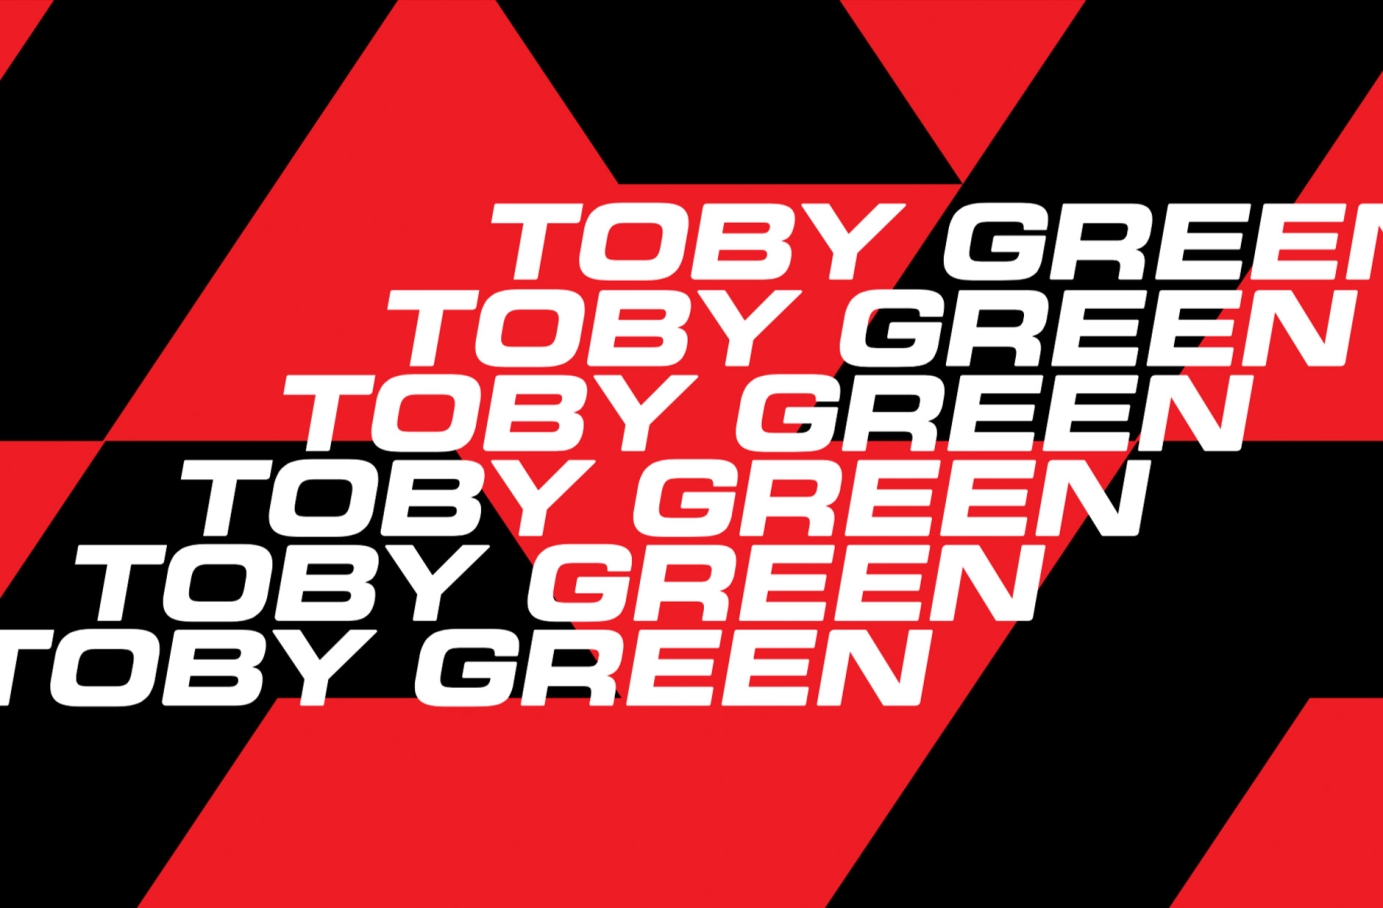 Branding for Toby Green by Tristan Palmer